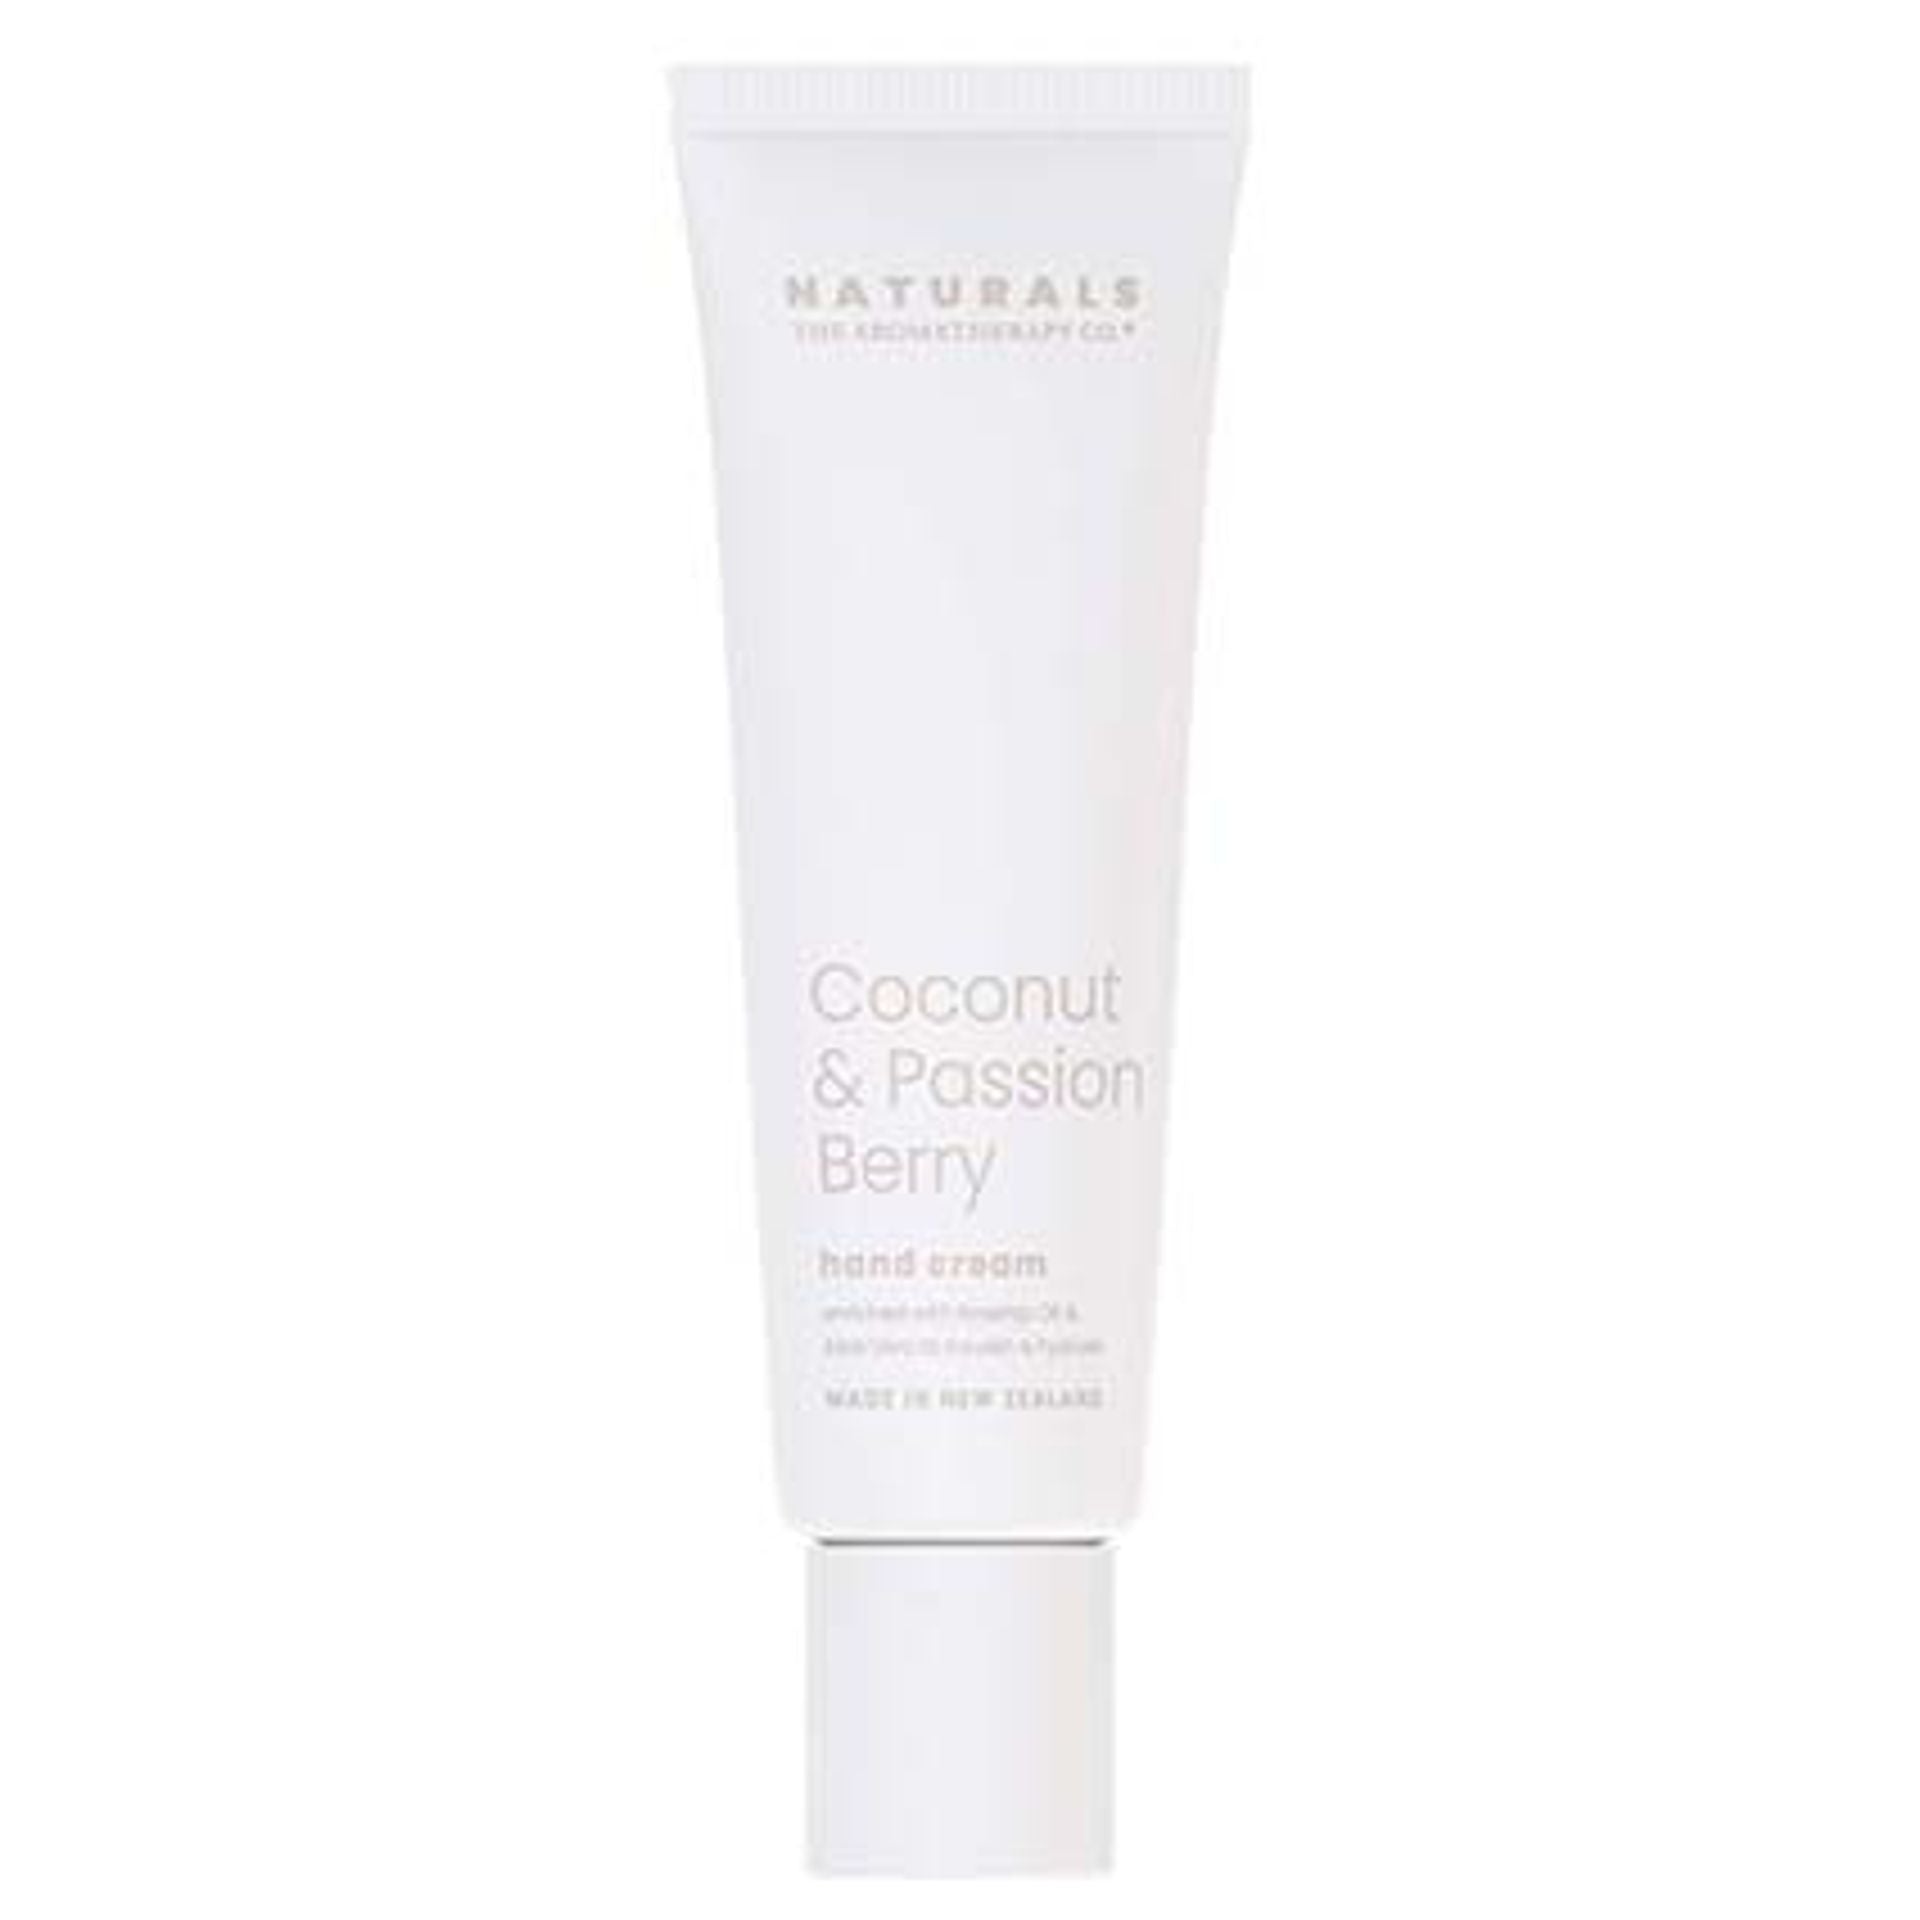 The Aromatherapy Co Naturals Coconut & Passion Berry Hand Cream